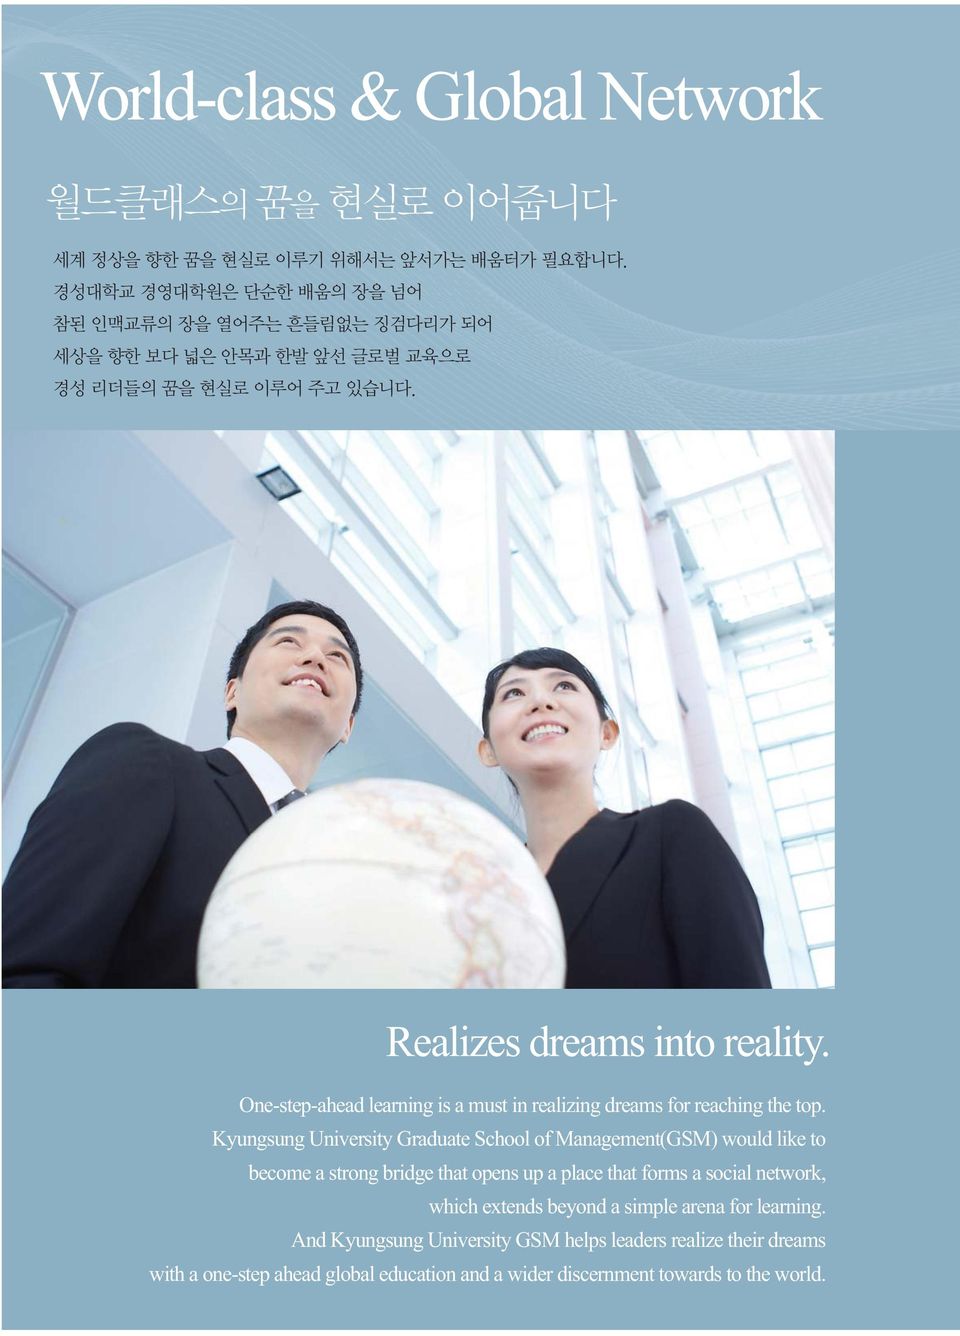 Kyungsung University Graduate School of Management(GSM) would like to become a strong bridge that opens up a place that